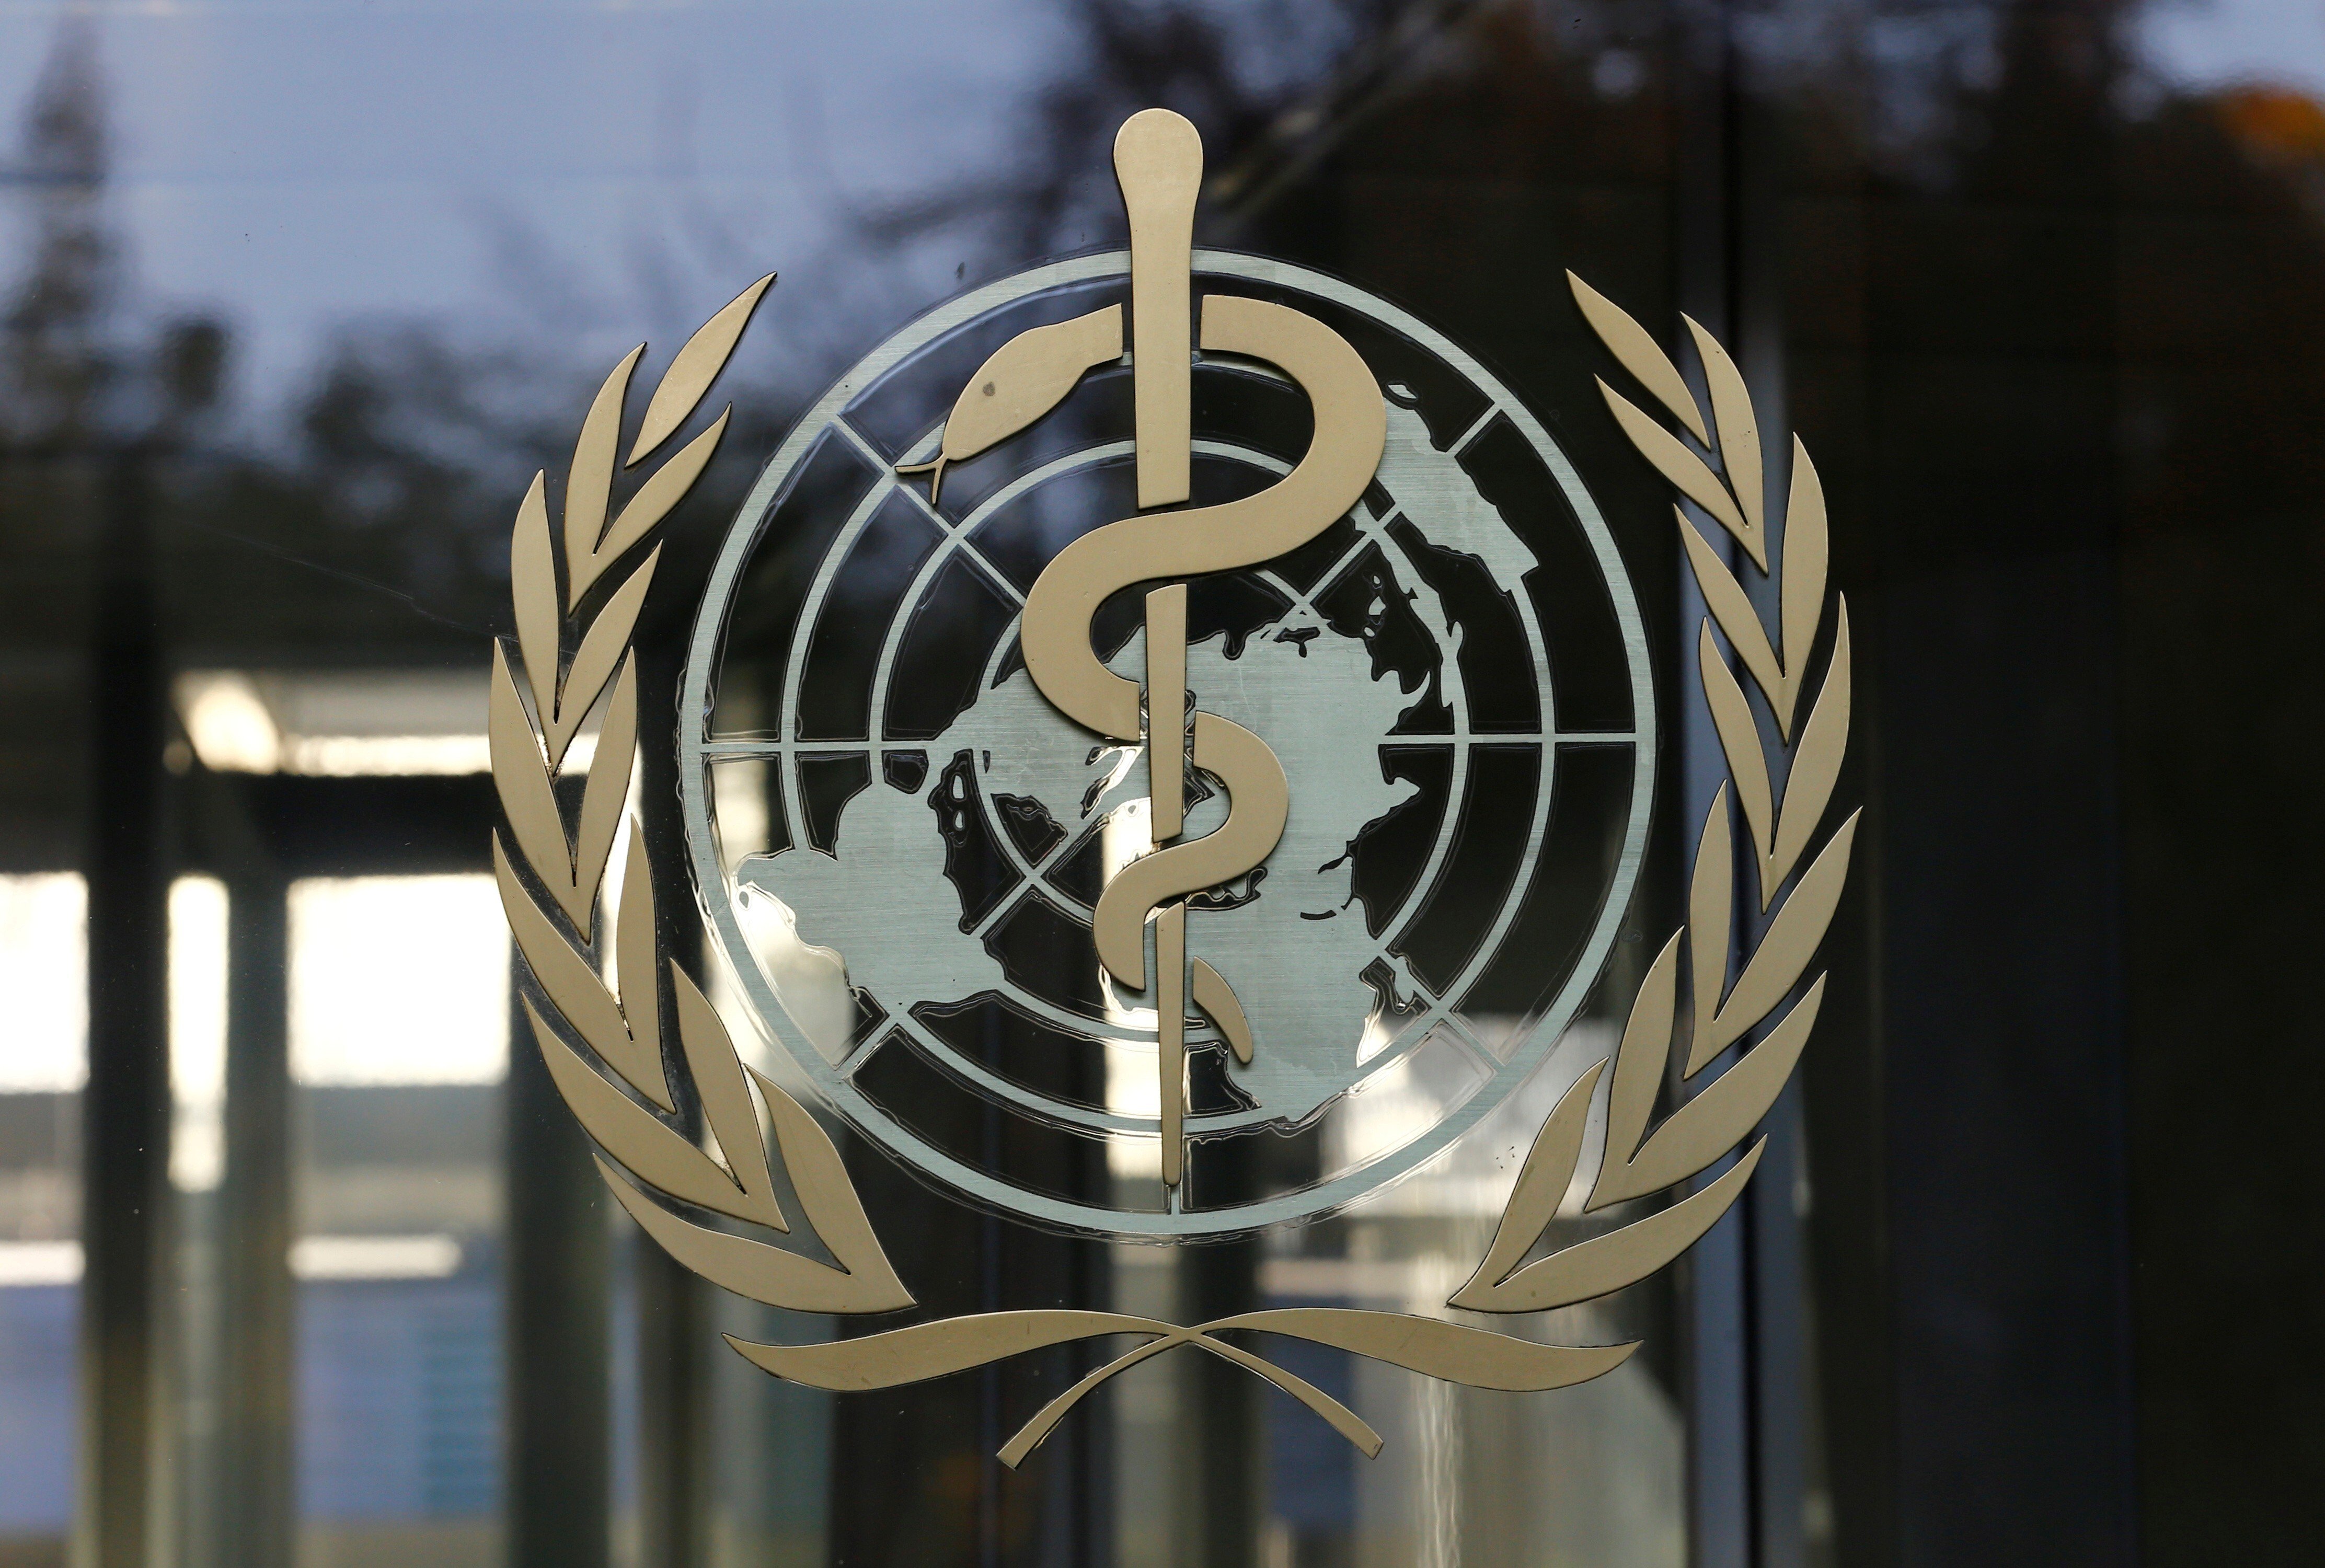 The World Health Organisation has so far received US$724 million in donations for its coronavirus response. Photo: Reuters